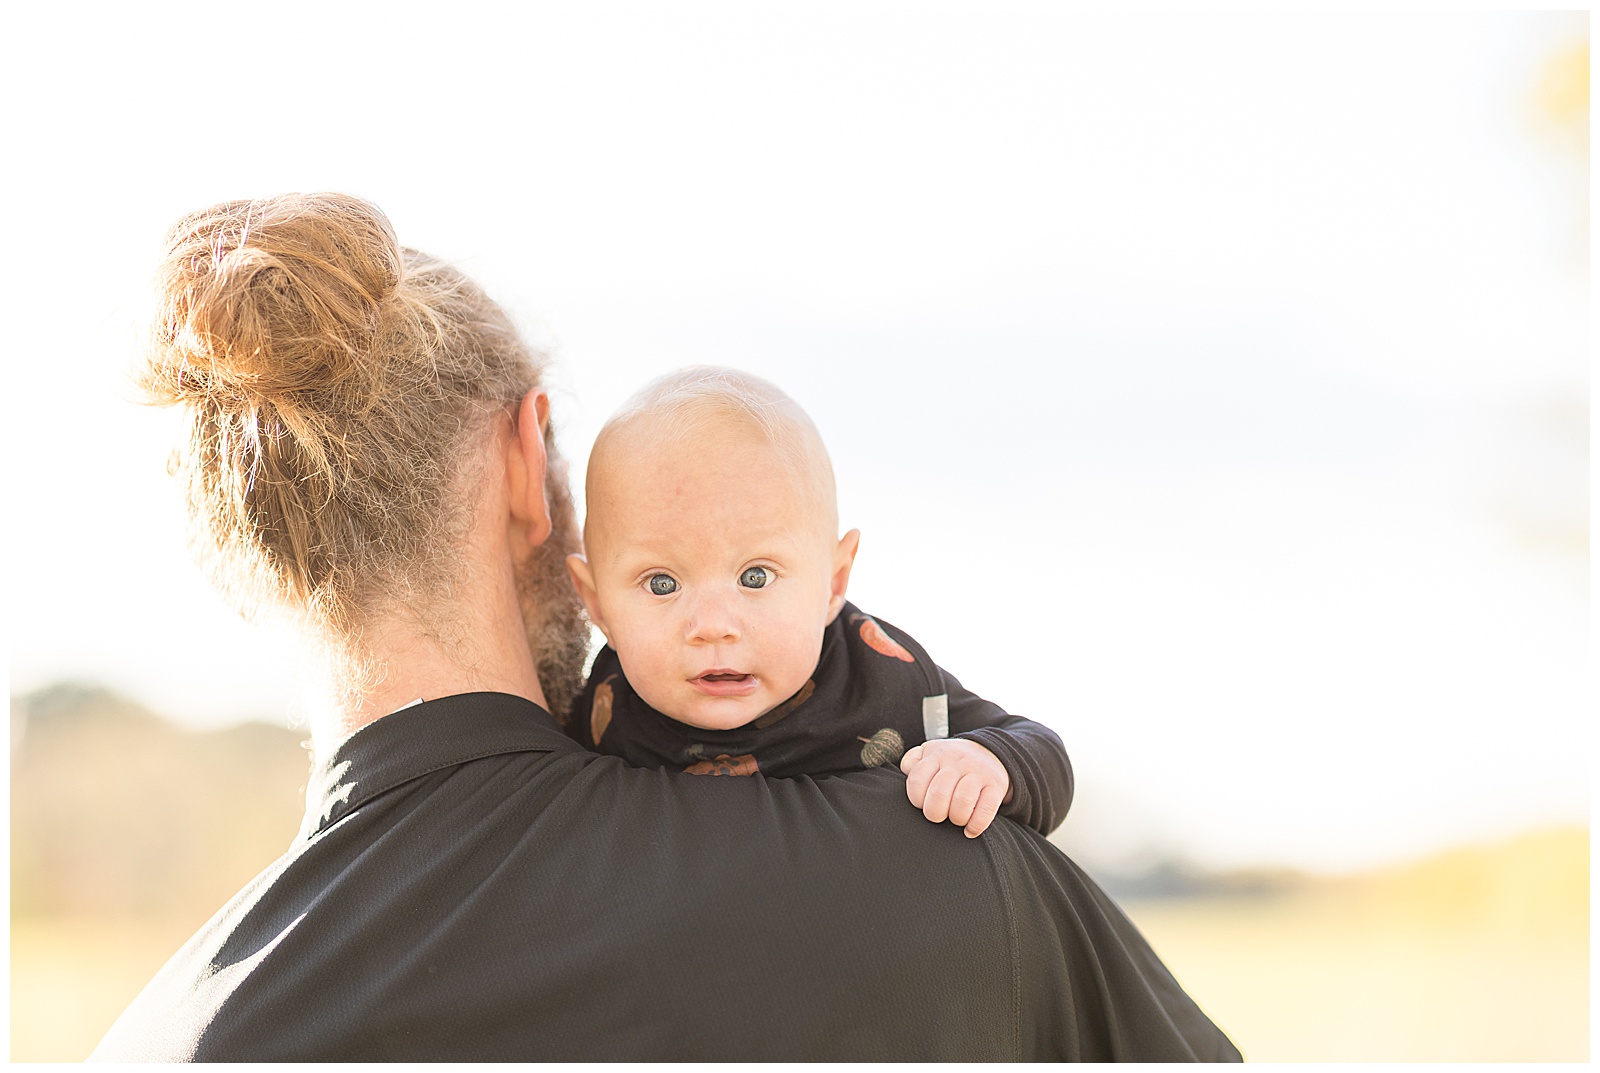 New Dad wears a blonde hair and bun with a black shirt and holds his baby boy over his shoulder as he looks at camera of Rebecca Rice with his baby blue eyes.